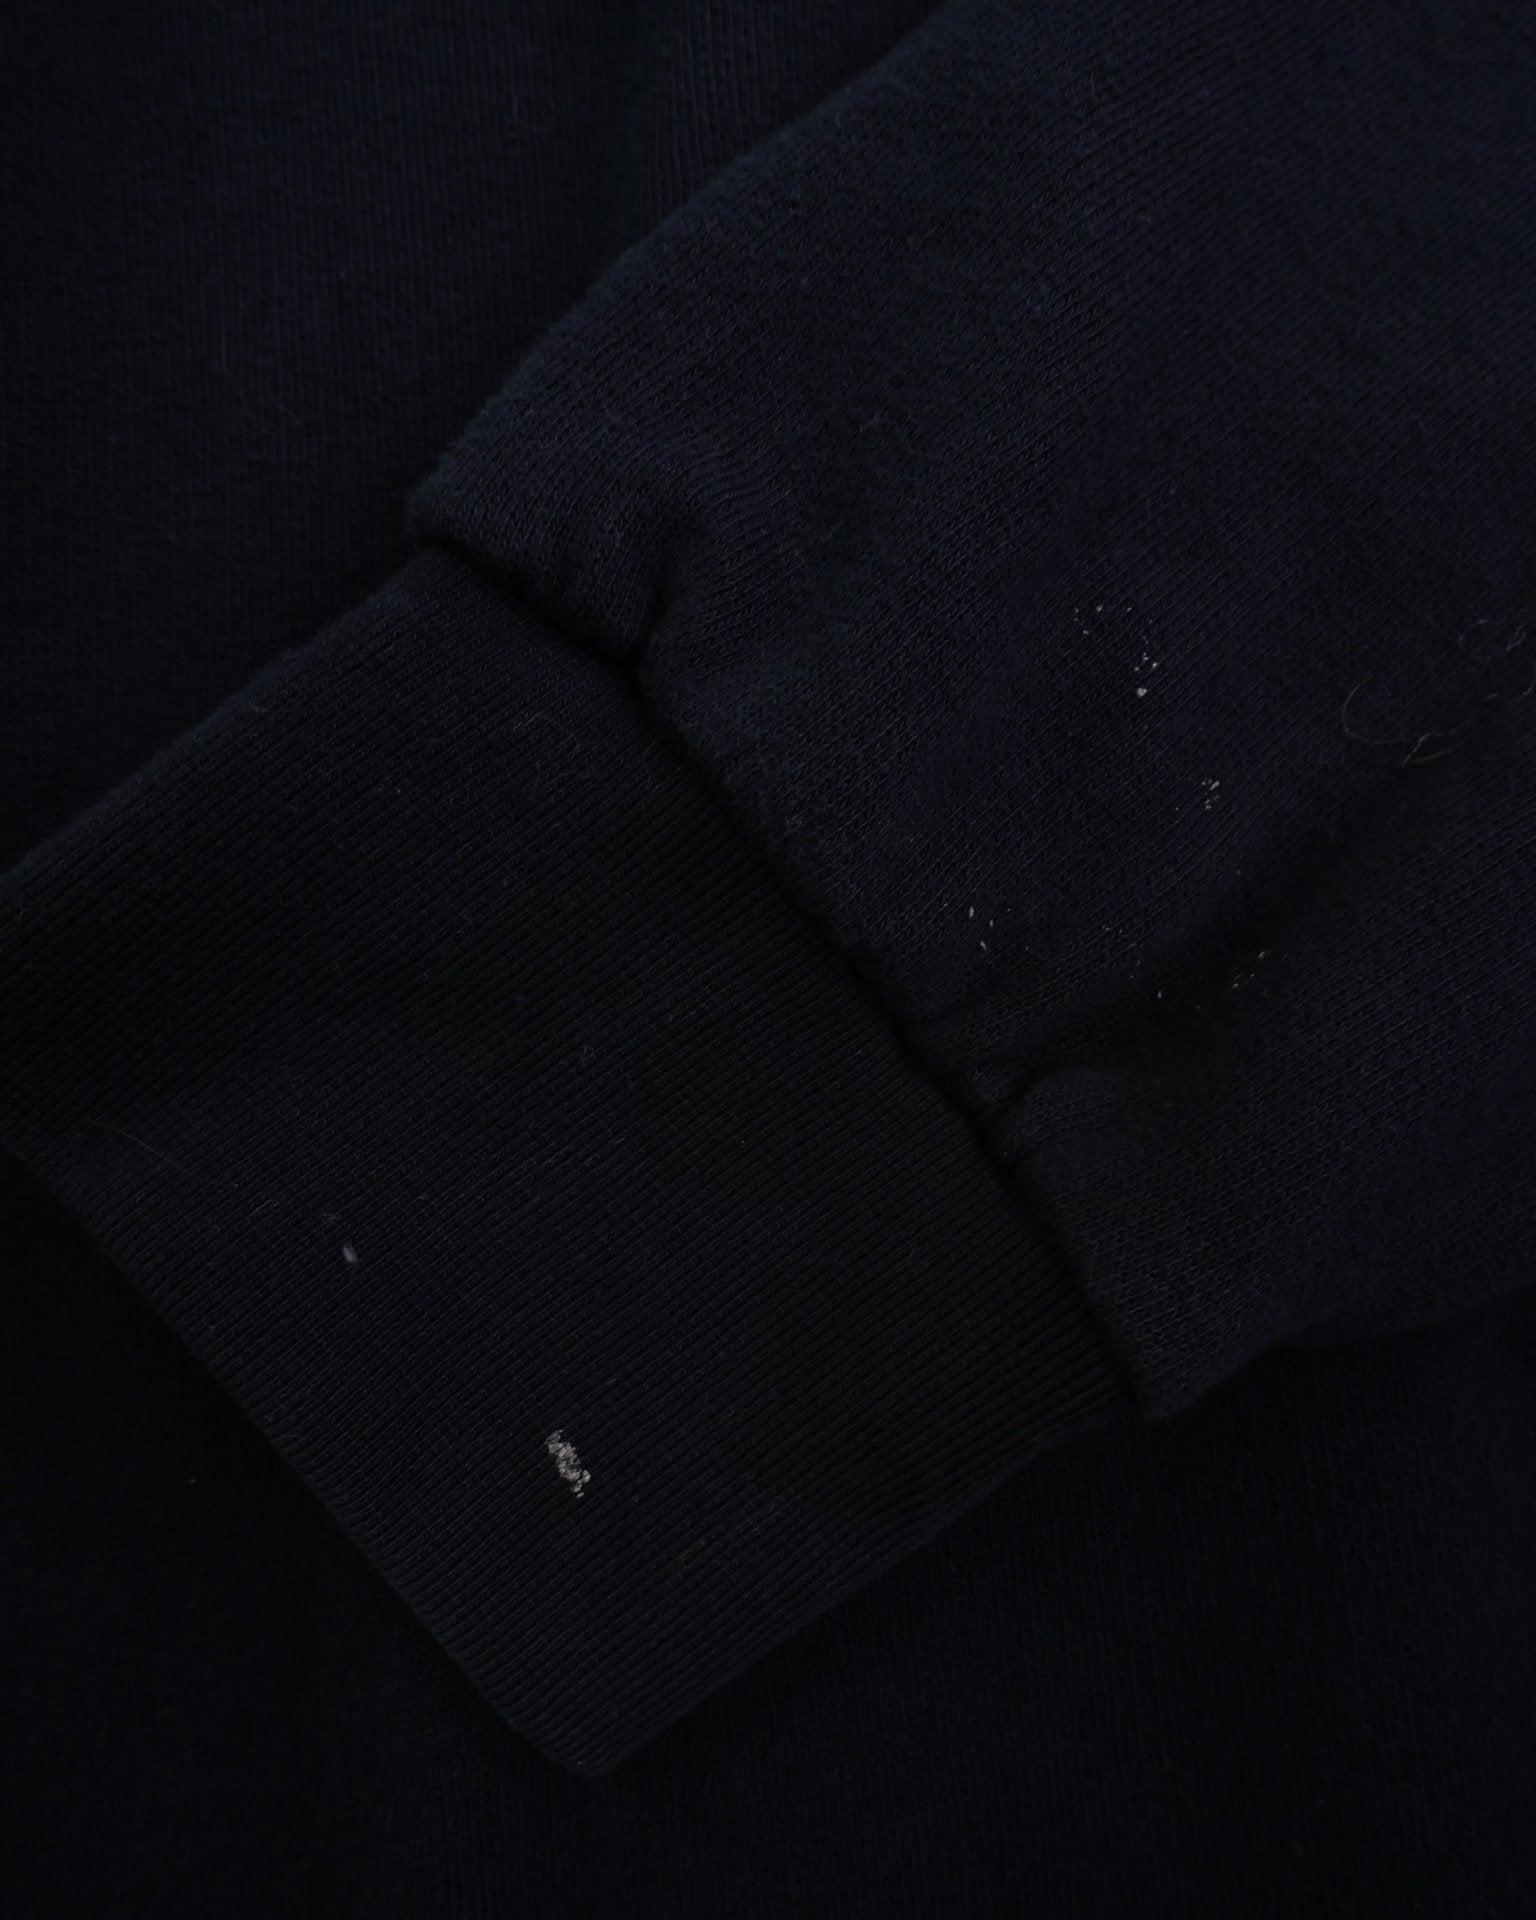 'Eickhoff' patched Spellout black Sweater - Peeces